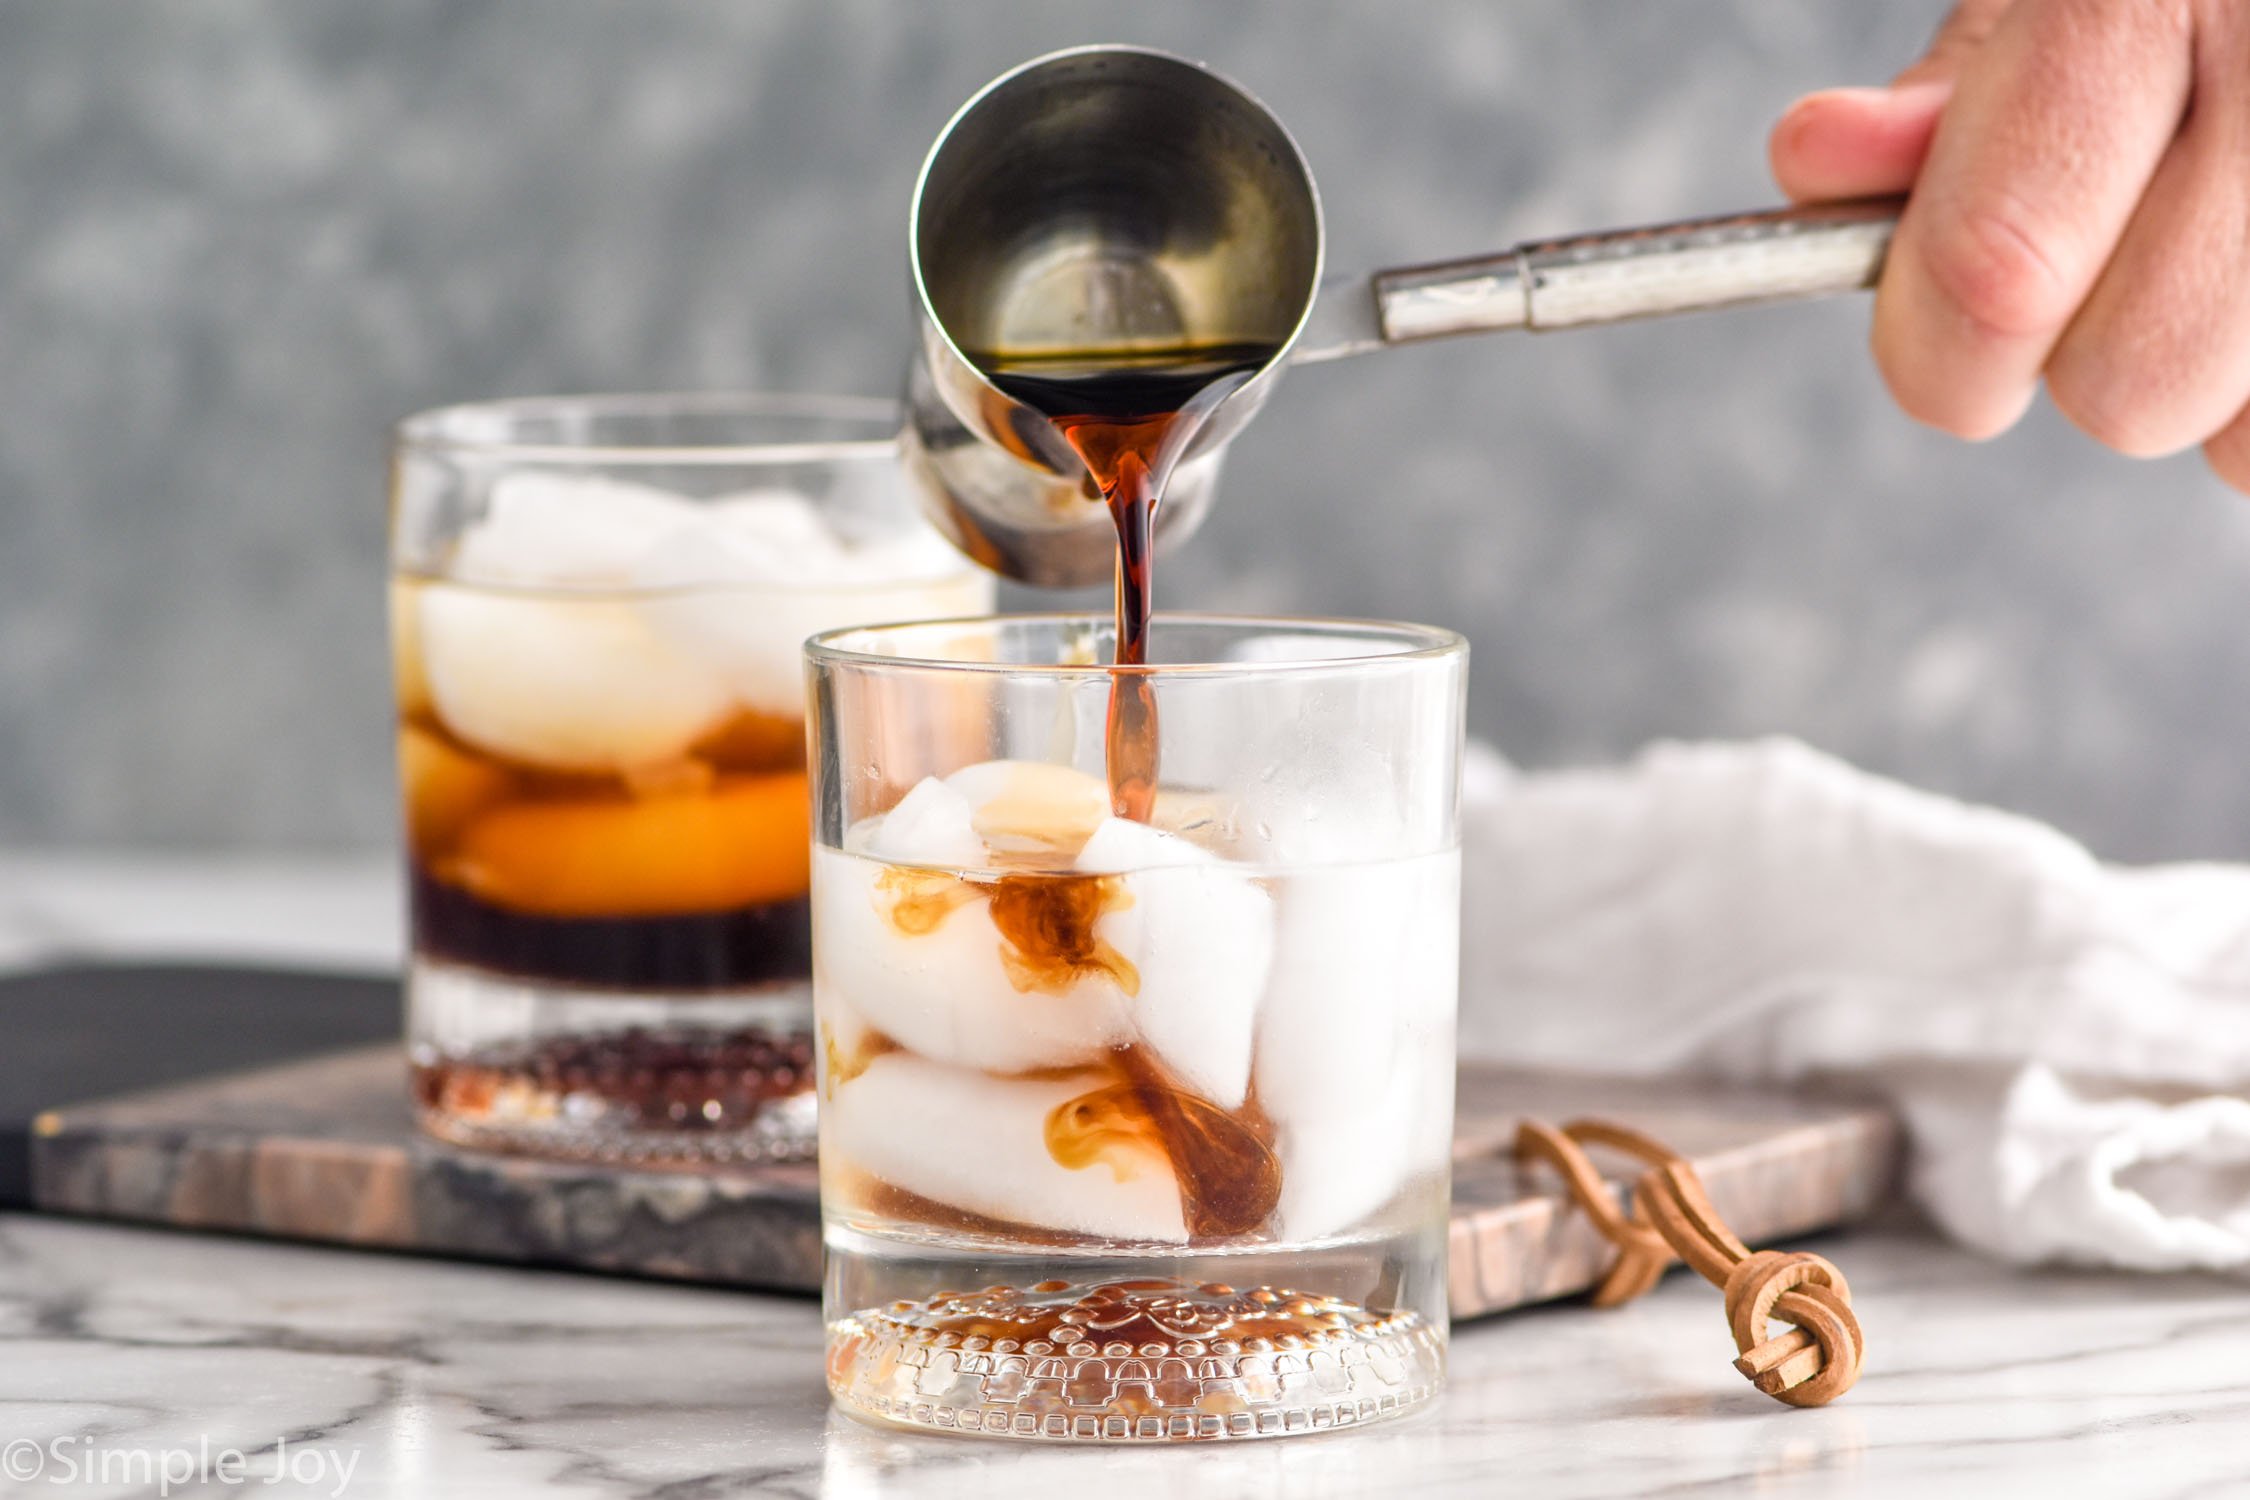 man's hand pouring cocktail jigger of Kahlua into a glass of white russian ingredients. Glass of white russian ingredients sitting in background